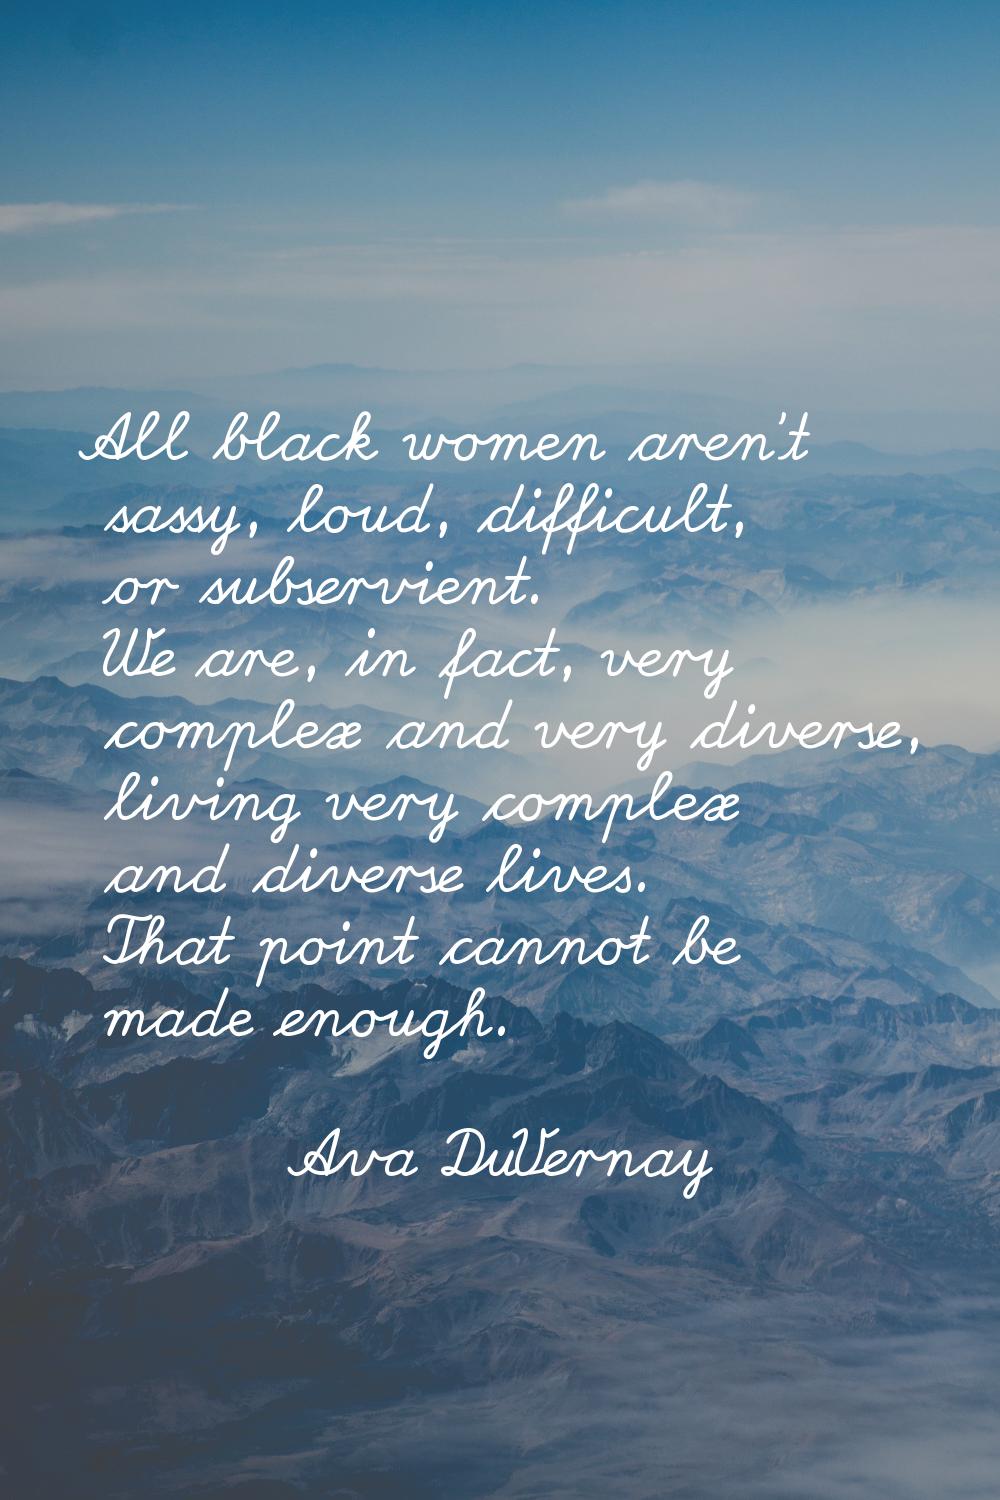 All black women aren't sassy, loud, difficult, or subservient. We are, in fact, very complex and ve